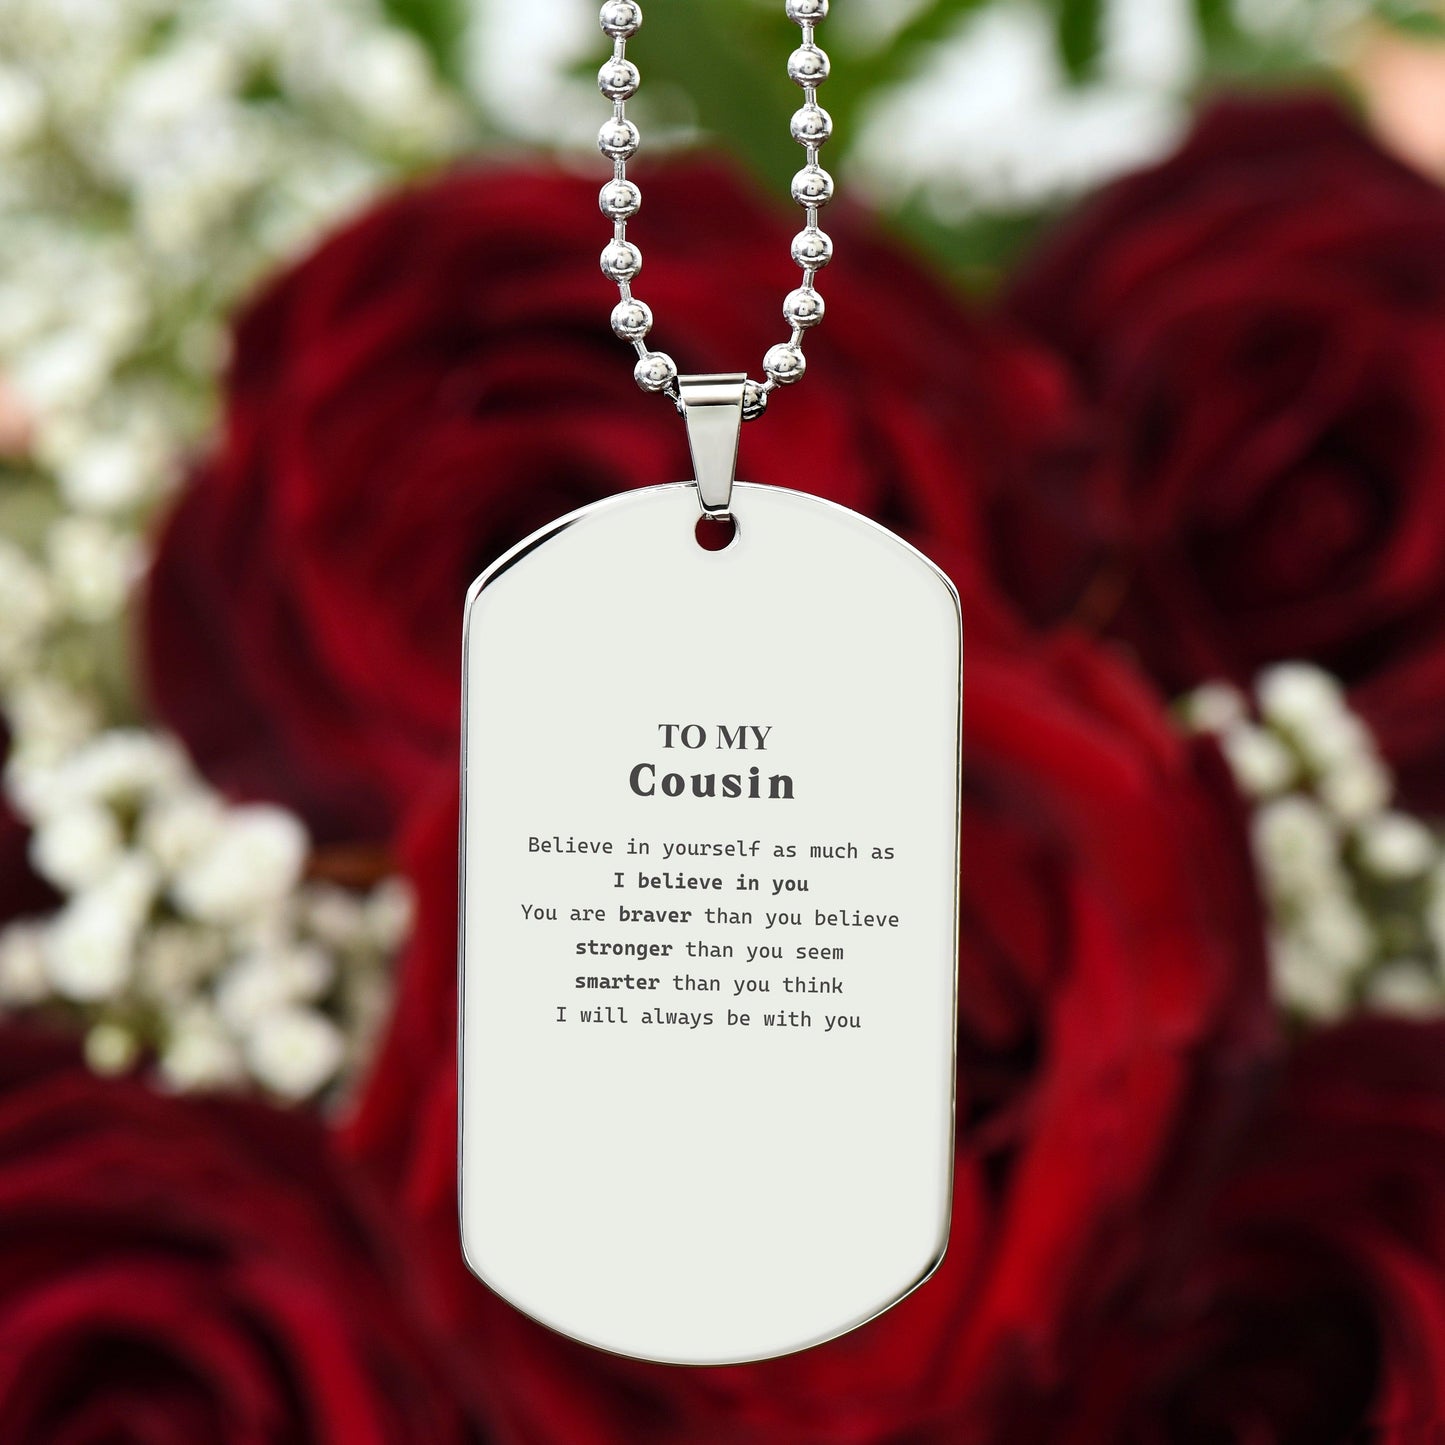 Cousin Silver Dog Tag Gifts, To My Cousin You are braver than you believe, stronger than you seem, Inspirational Gifts For Cousin Engraved, Birthday, Christmas Gifts For Cousin Men Women - Mallard Moon Gift Shop